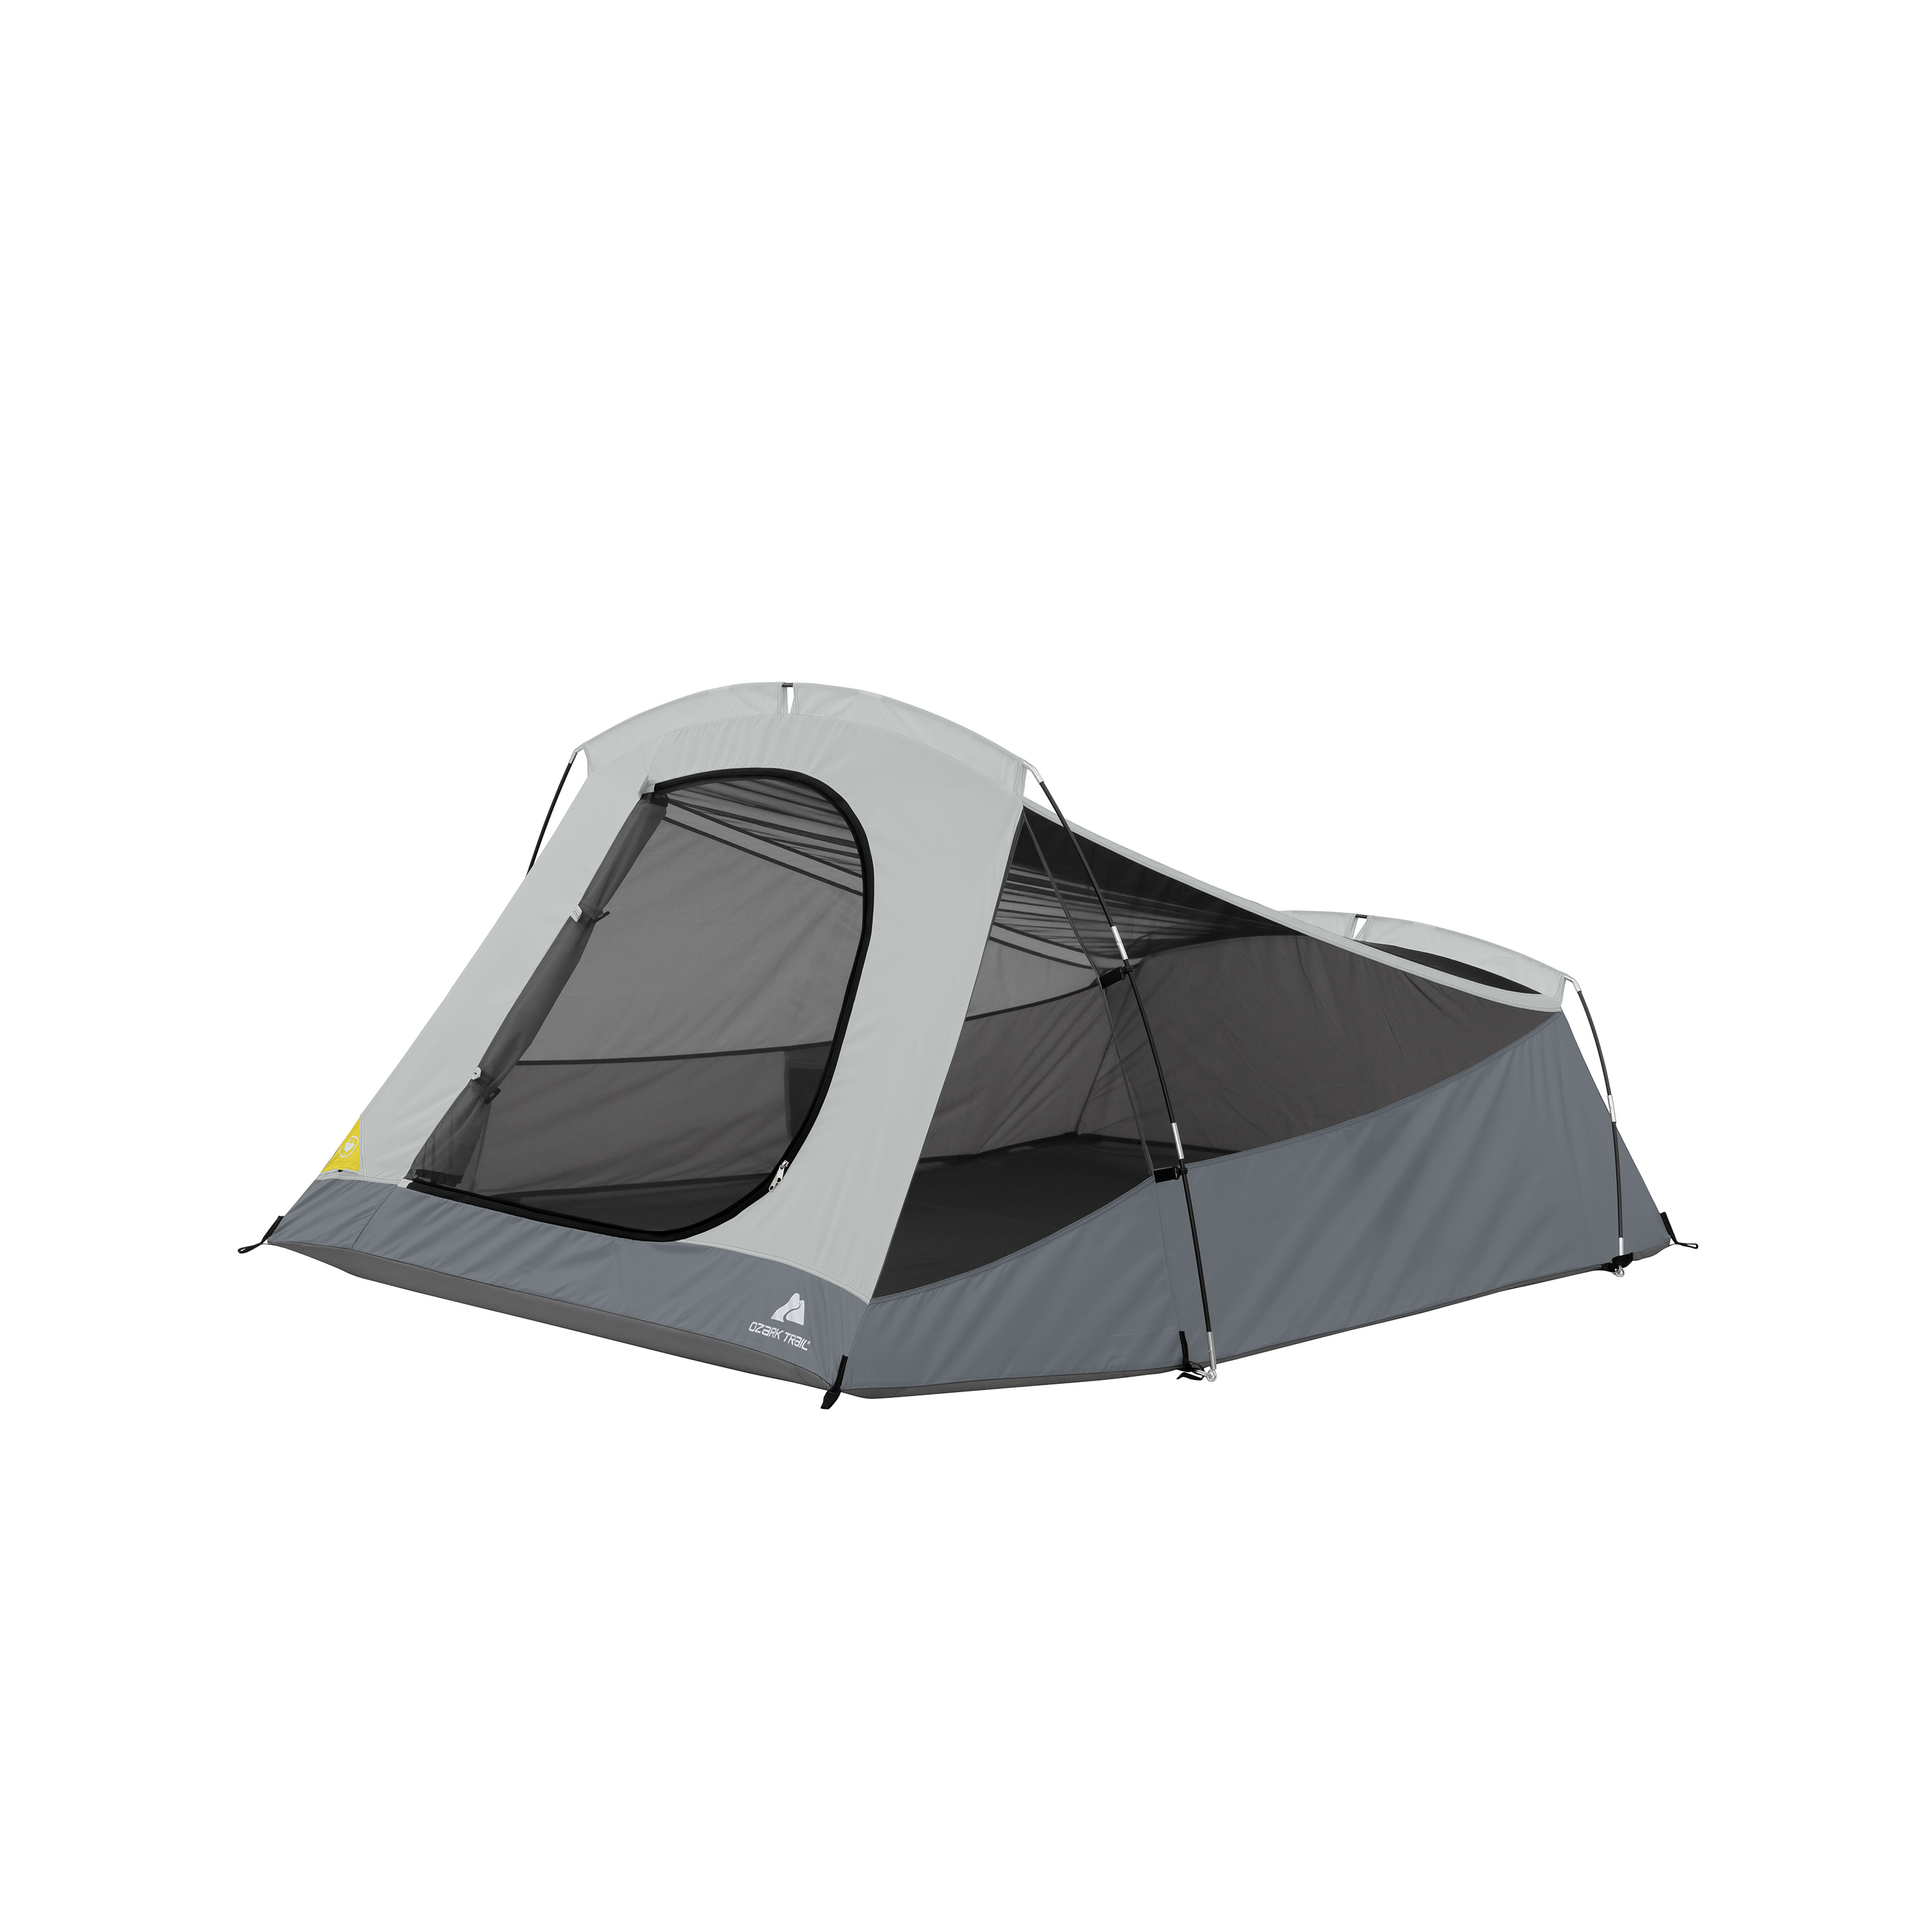 Ozark Trail 3-Person 16pc Camping Combo, Dome Tent with Rainfly, Trekking poles, Sleeping Bag, Sleeping Pad and Low-Back Chairs - image 3 of 12